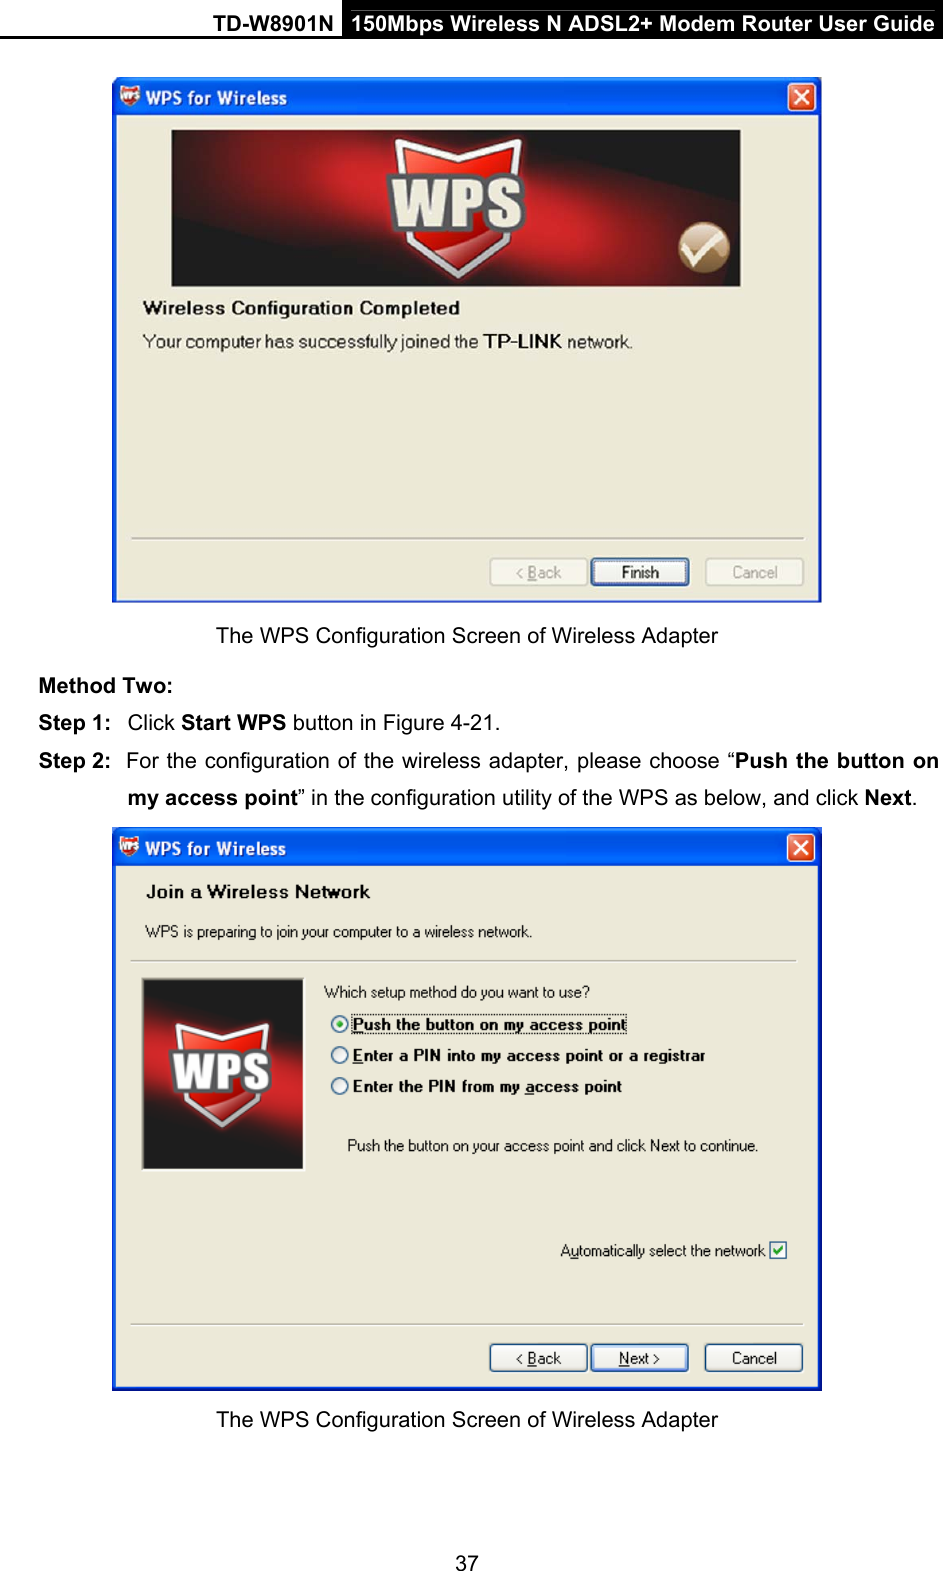 TD-W8901N  150Mbps Wireless N ADSL2+ Modem Router User Guide 37  The WPS Configuration Screen of Wireless Adapter   Method Two: Step 1:  Click Start WPS button in Figure 4-21. Step 2:  For the configuration of the wireless adapter, please choose “Push the button on my access point” in the configuration utility of the WPS as below, and click Next.   The WPS Configuration Screen of Wireless Adapter 